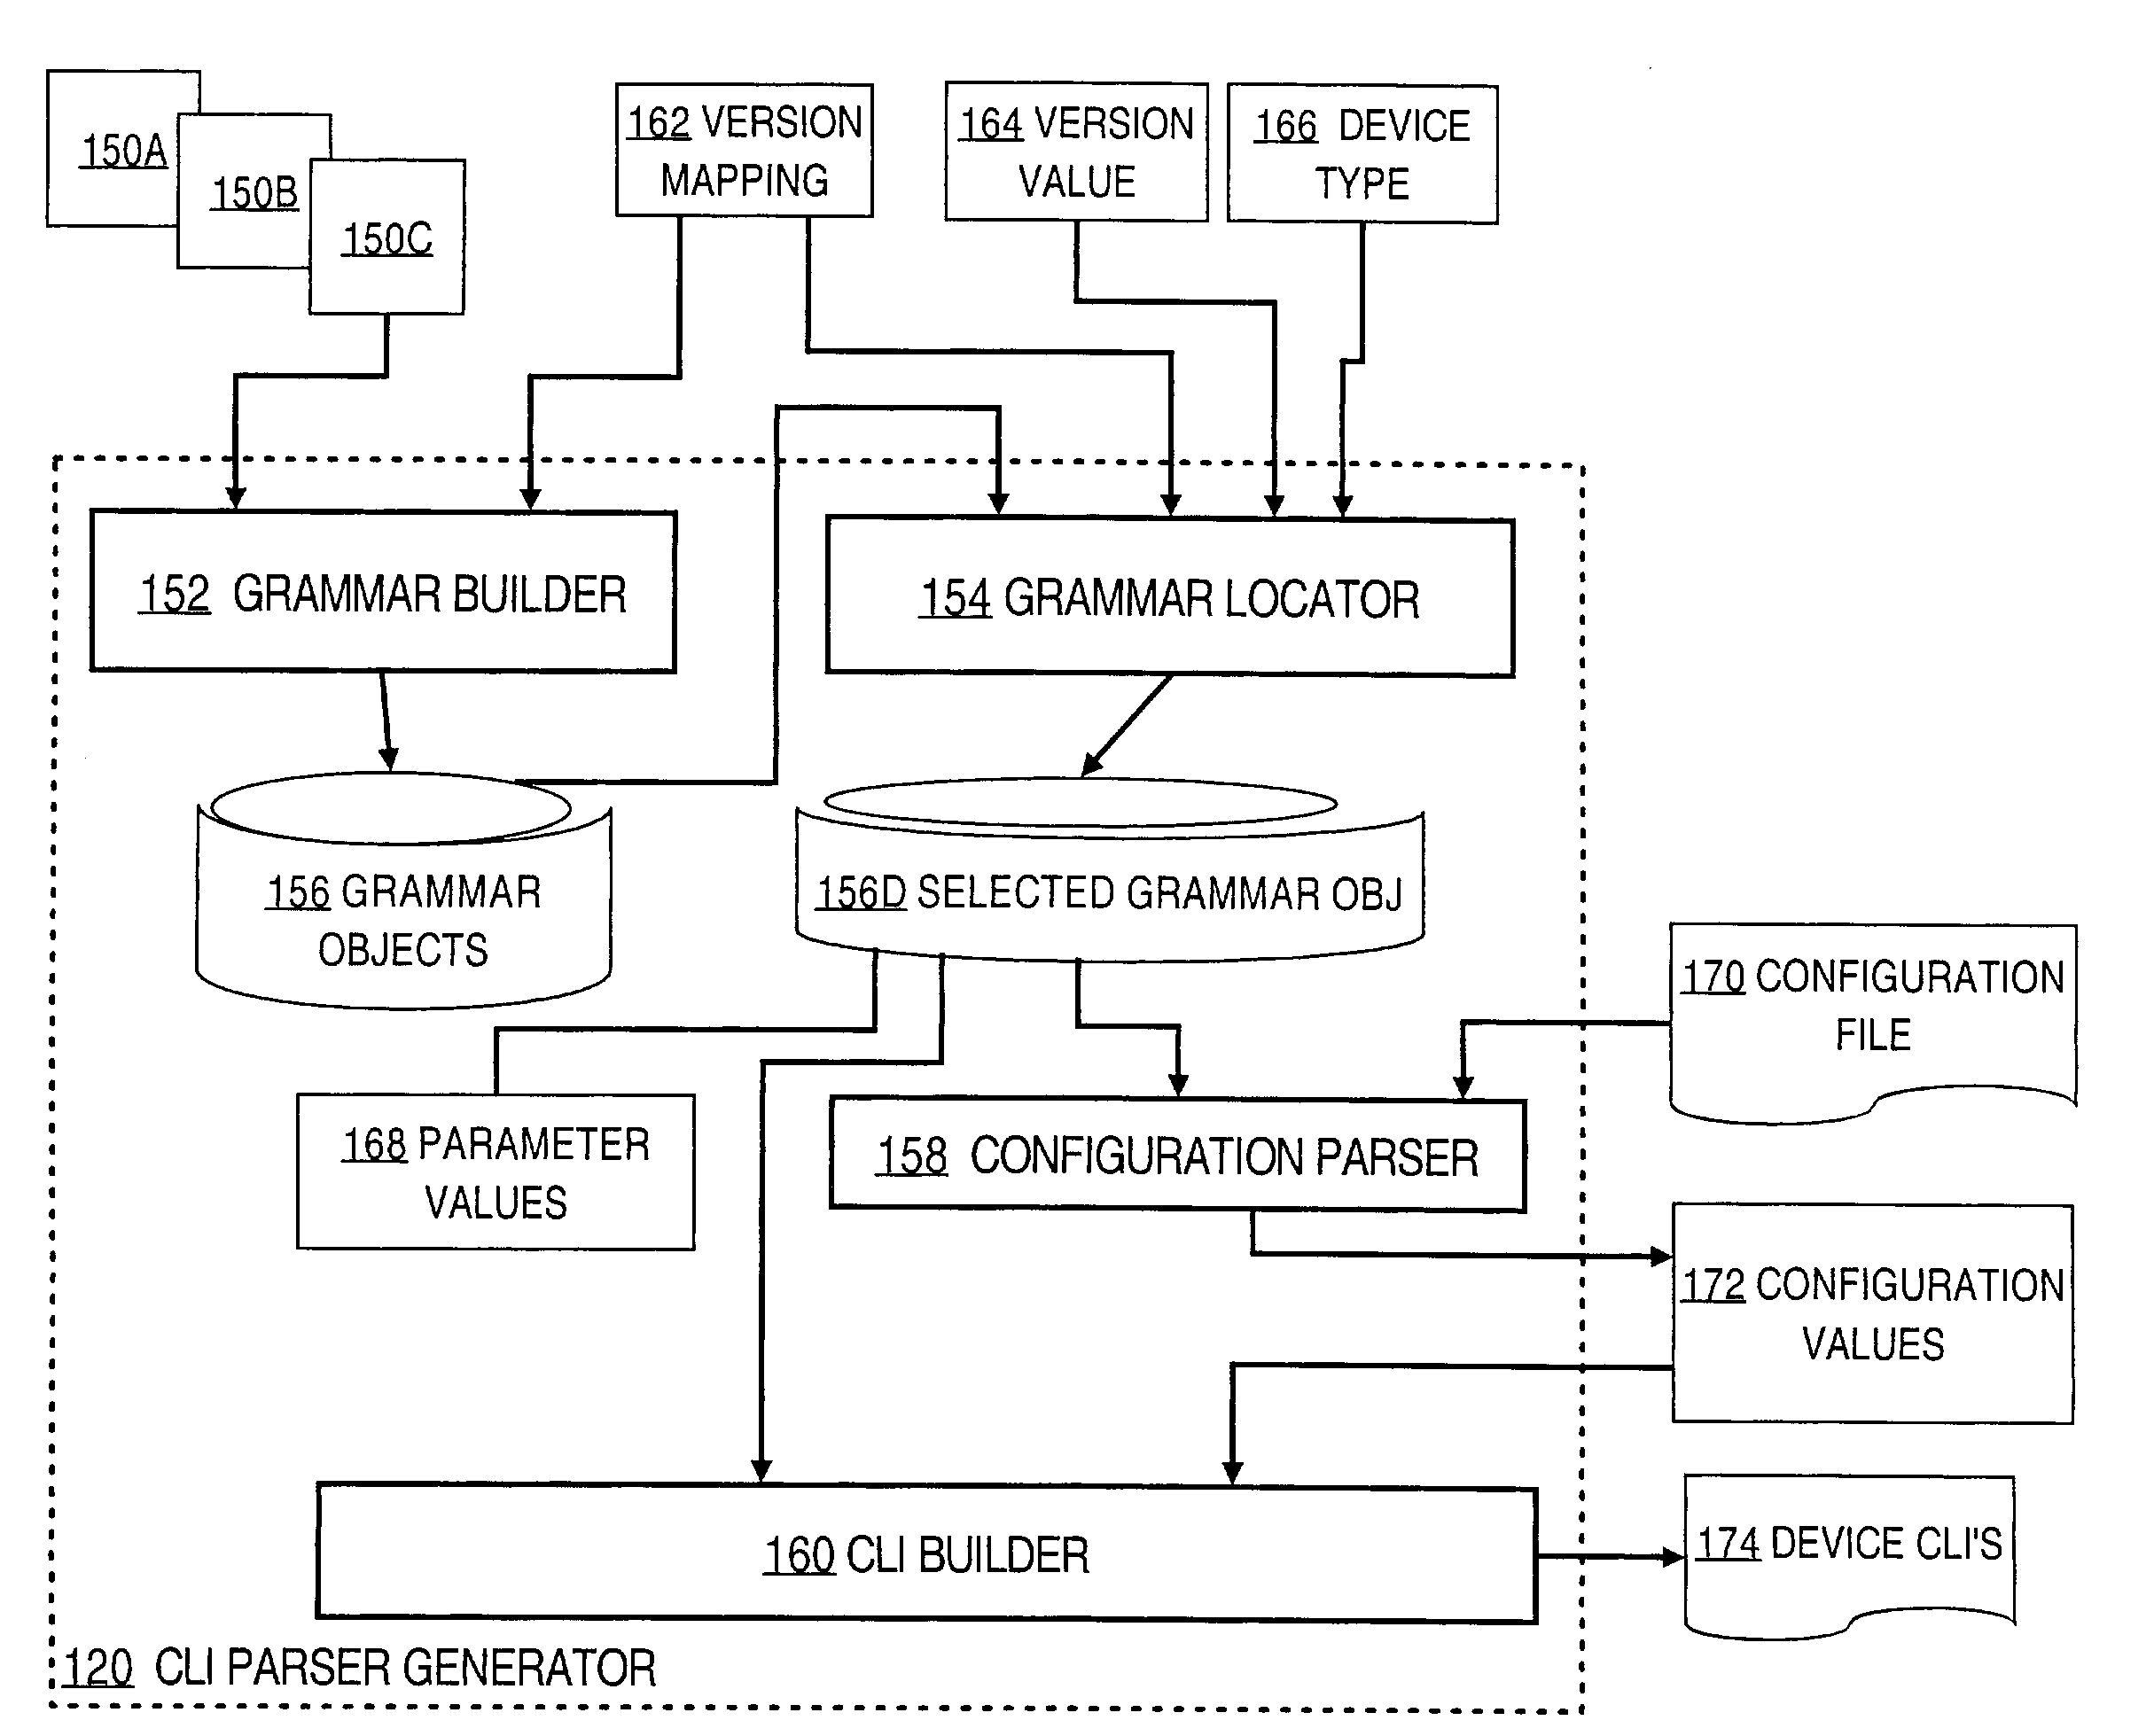 Method and apparatus for parsing and generating configuration commands for network devices using a grammar-based framework